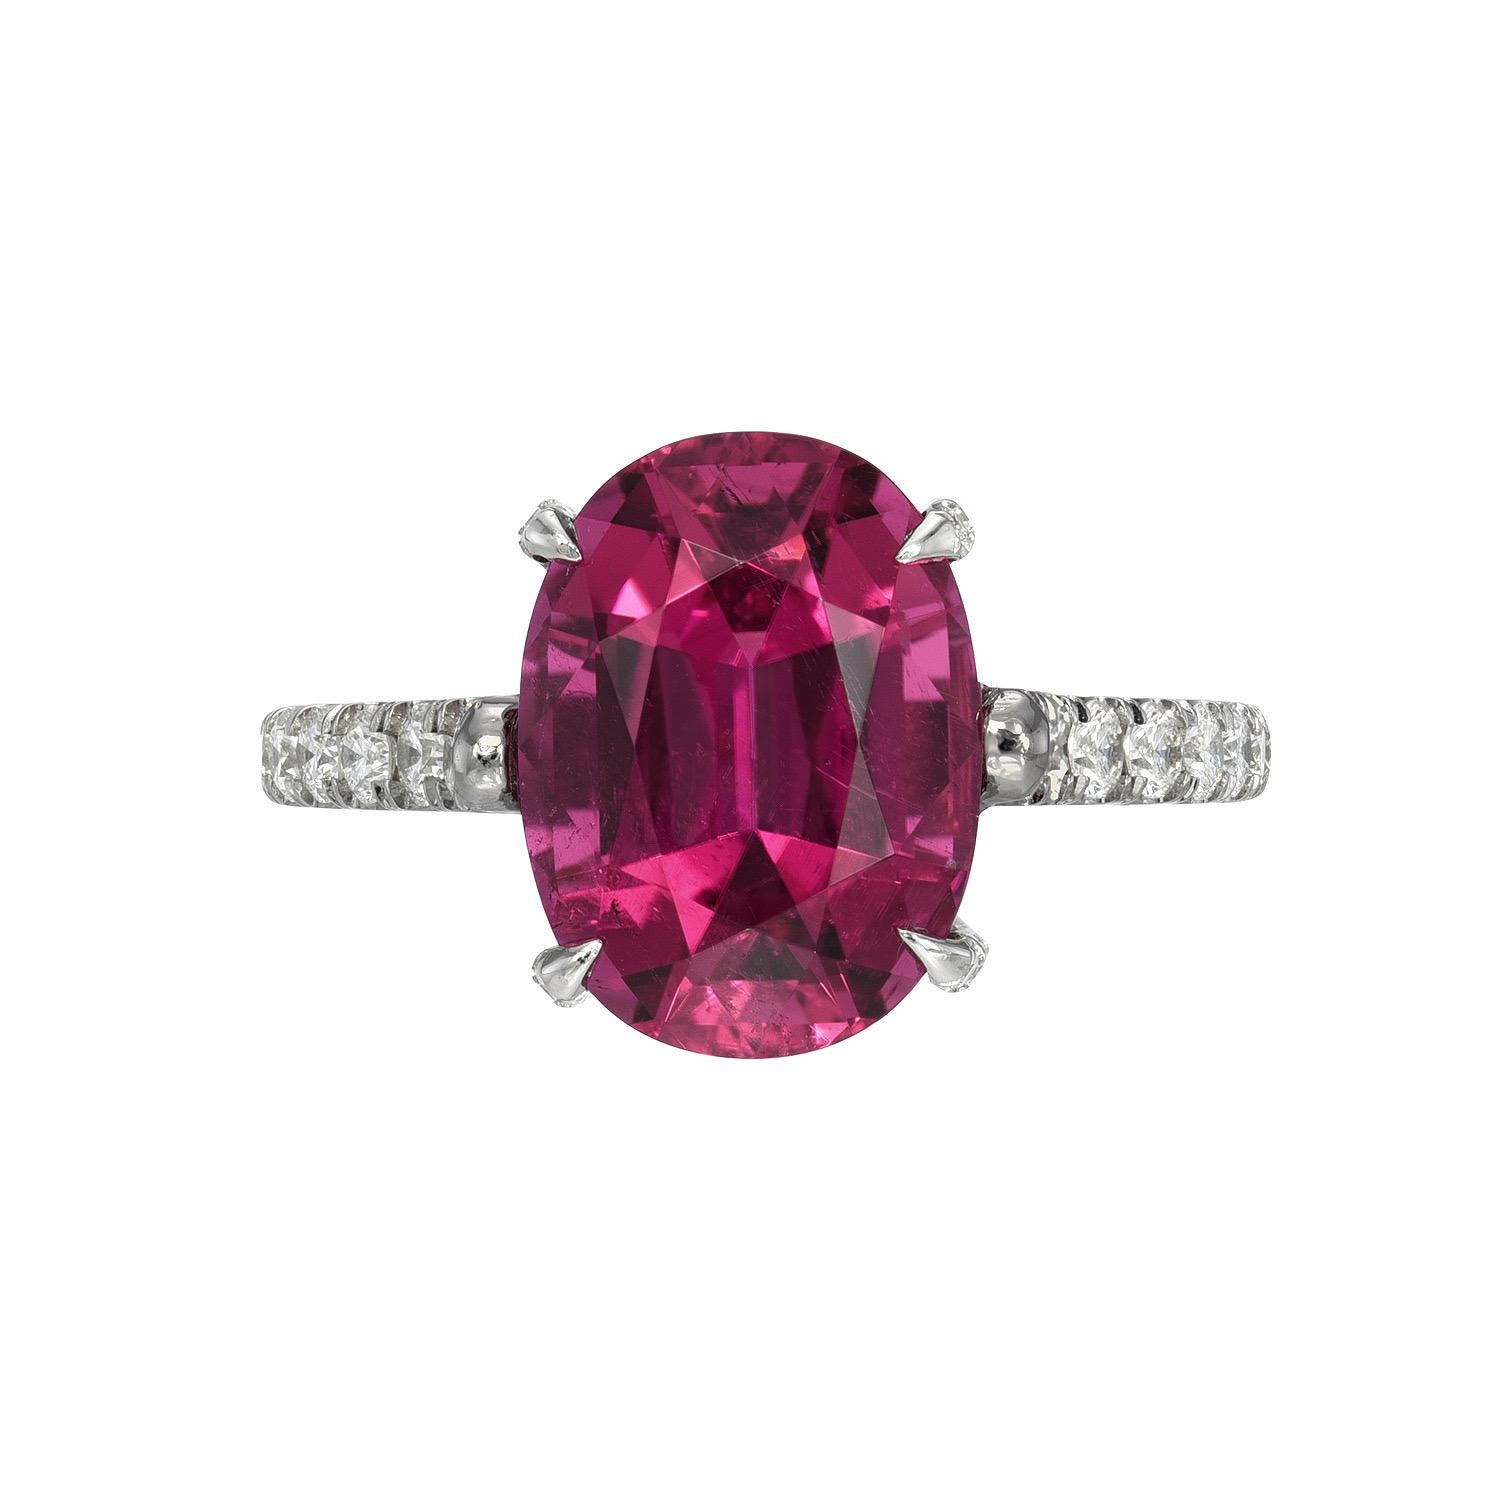 Oval Cut Rubellite Tourmaline Ring 3.92 Carat Oval For Sale